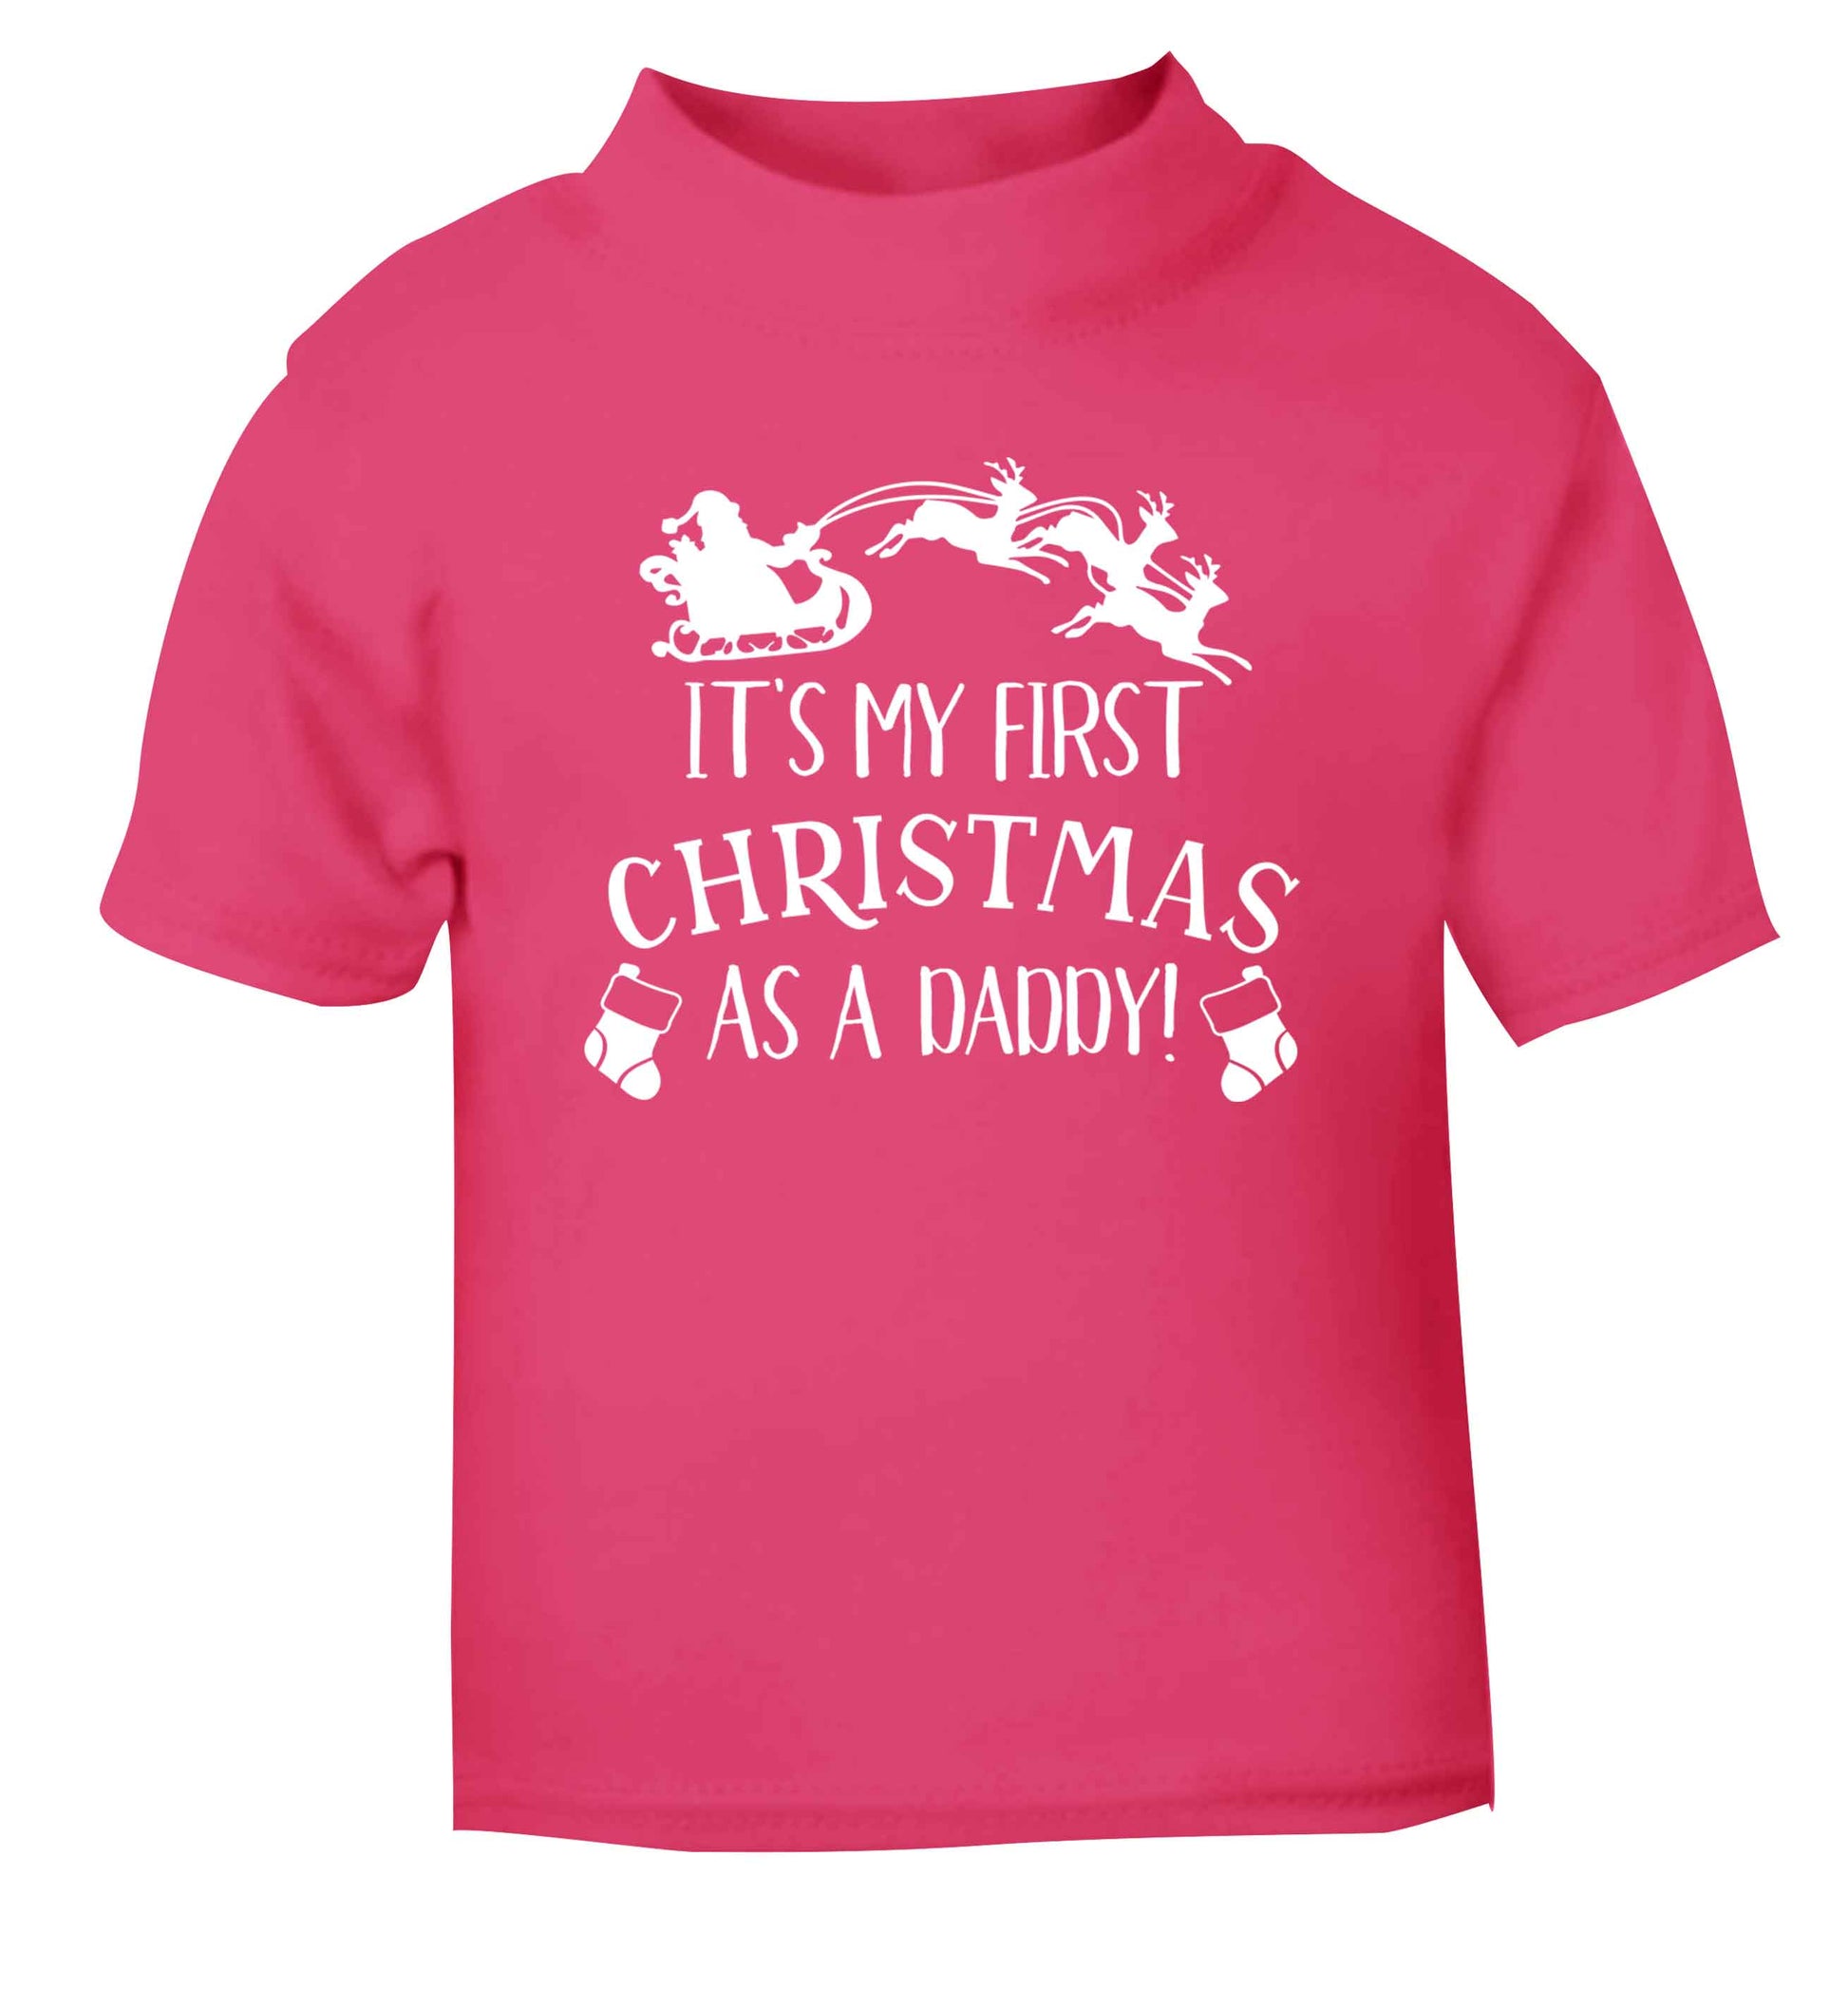 It's my first Christmas as a daddy pink Baby Toddler Tshirt 2 Years